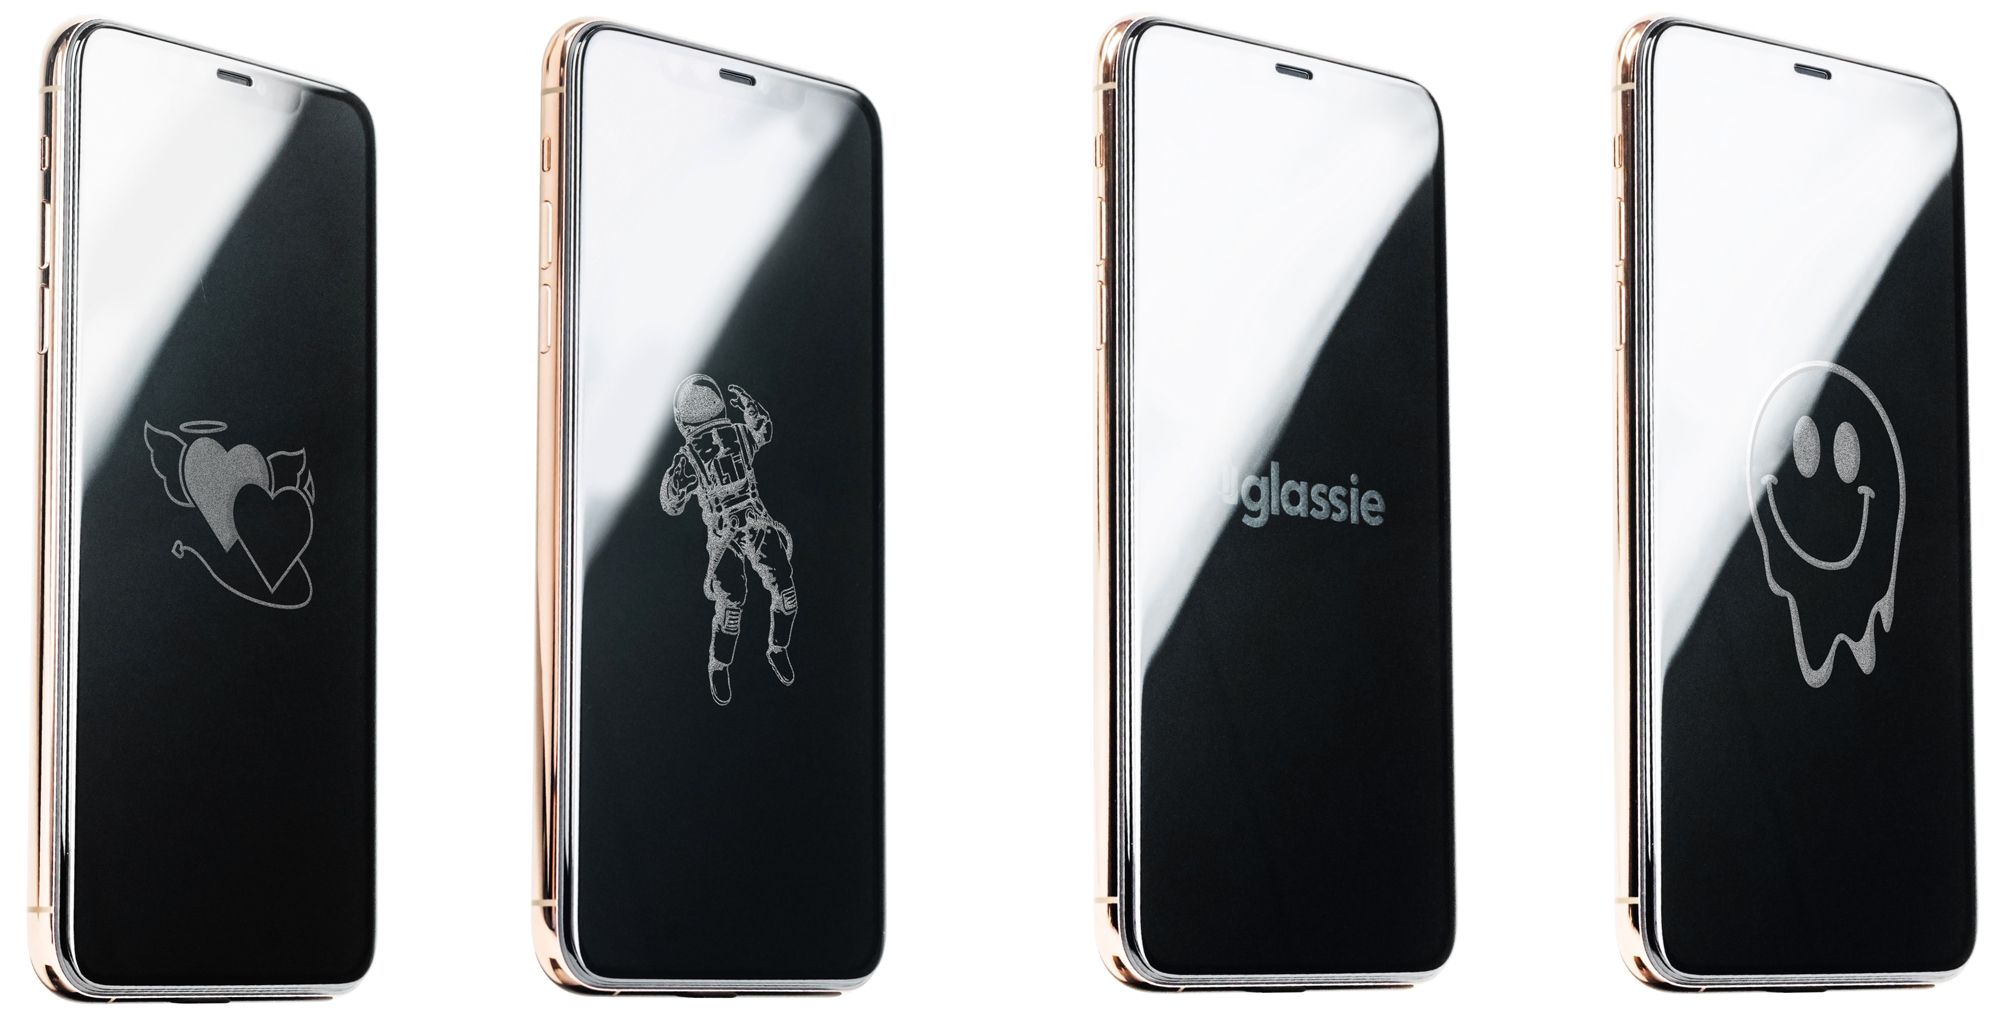 This Screen Protector Hides an Image You Can Only See When the Phone Turns Off